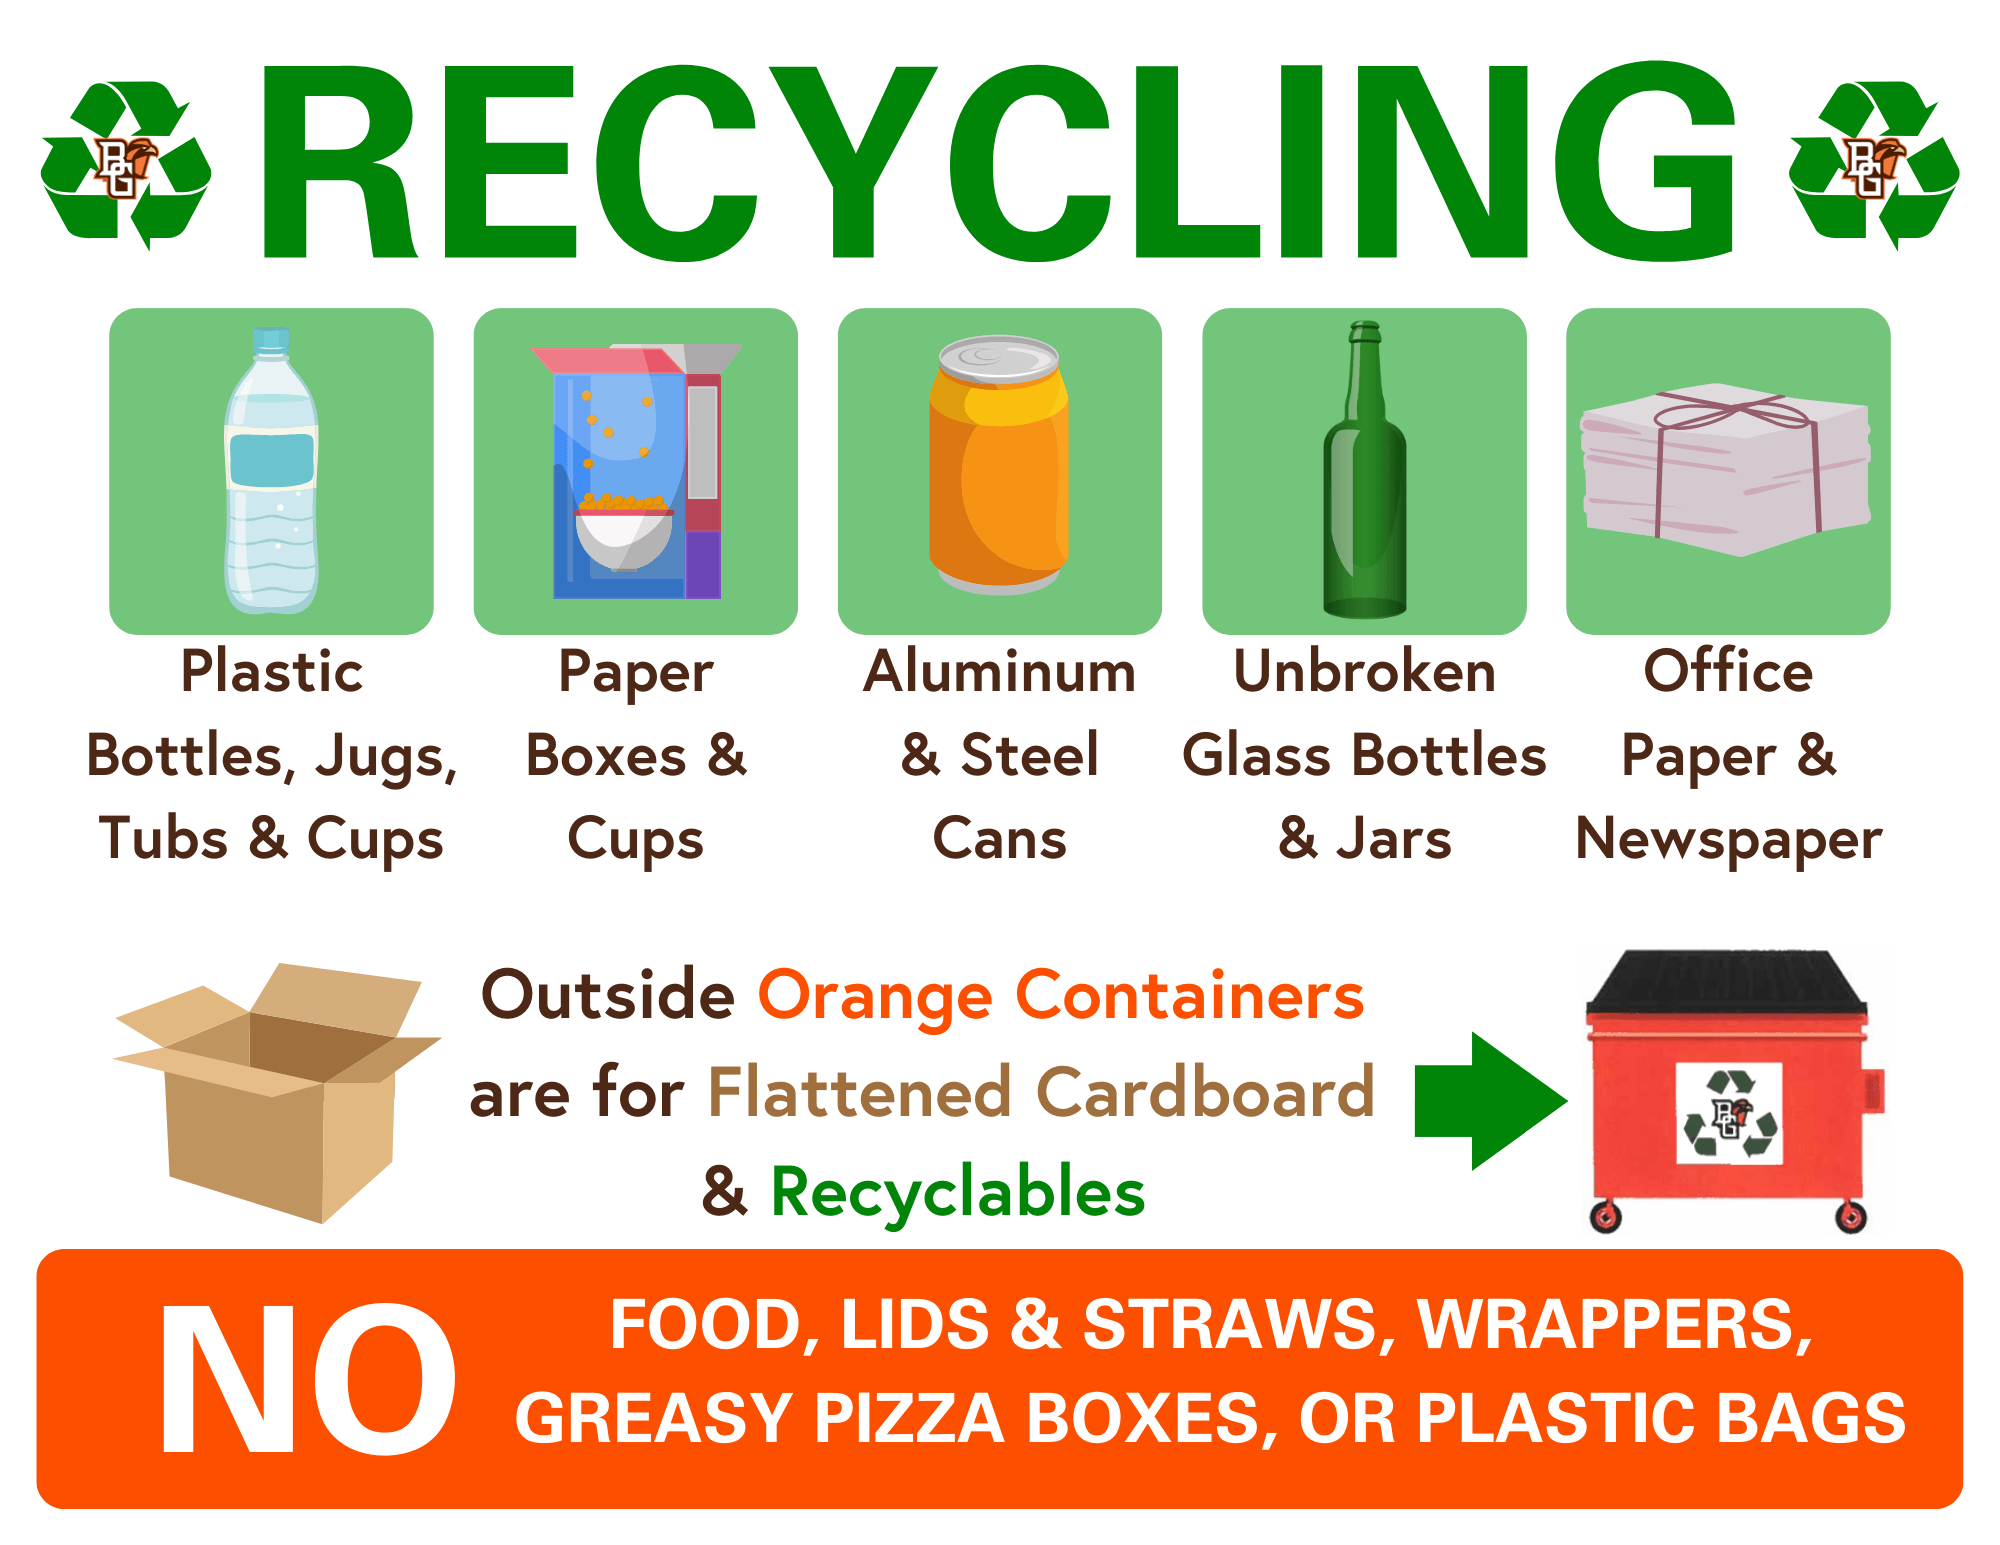 RECYCLING - 1